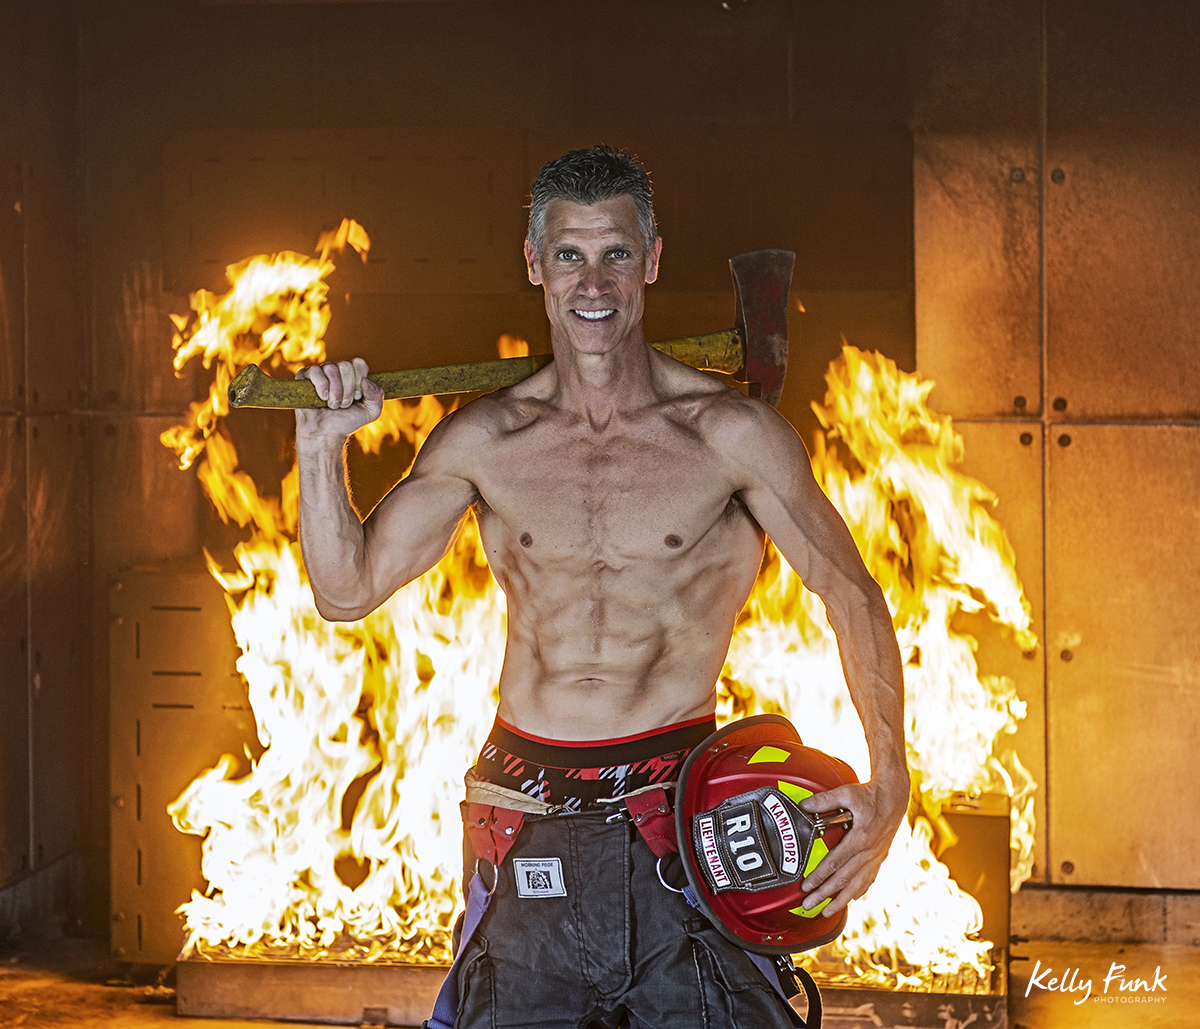 a good looking fire fighter poses for a commercial portrait during shooting for the 2019 Kamloops fire fighters calendar, Thompson Okanagan region, British Columbia, Canada